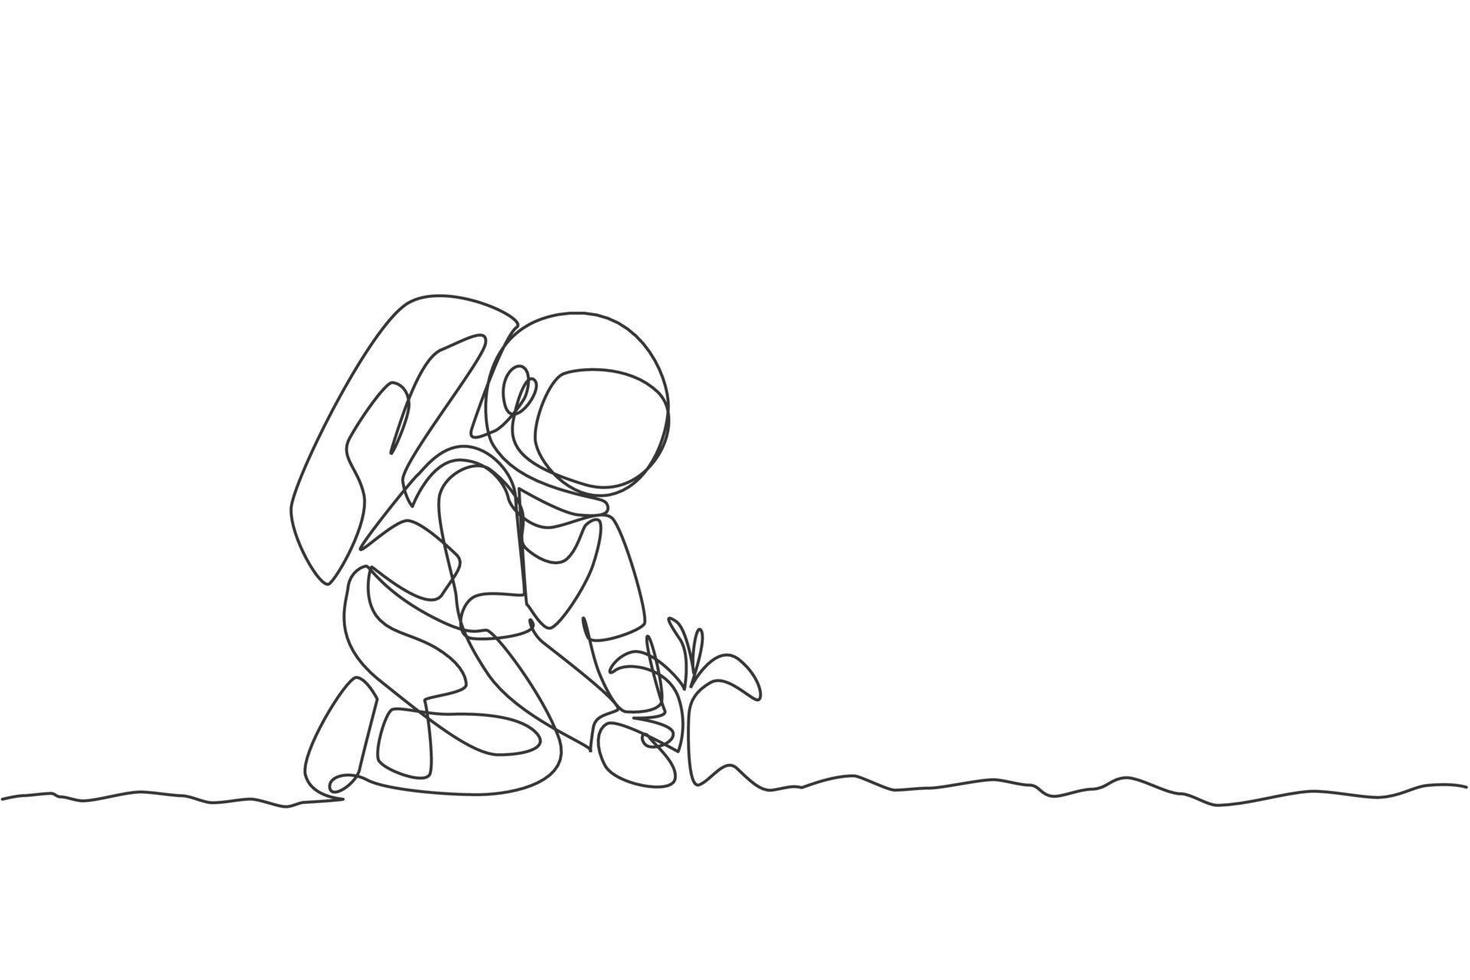 One continuous line drawing of spaceman planting new species tree seed carefully in moon surface. Deep space farming astronaut concept. Dynamic single line draw design vector graphic illustration